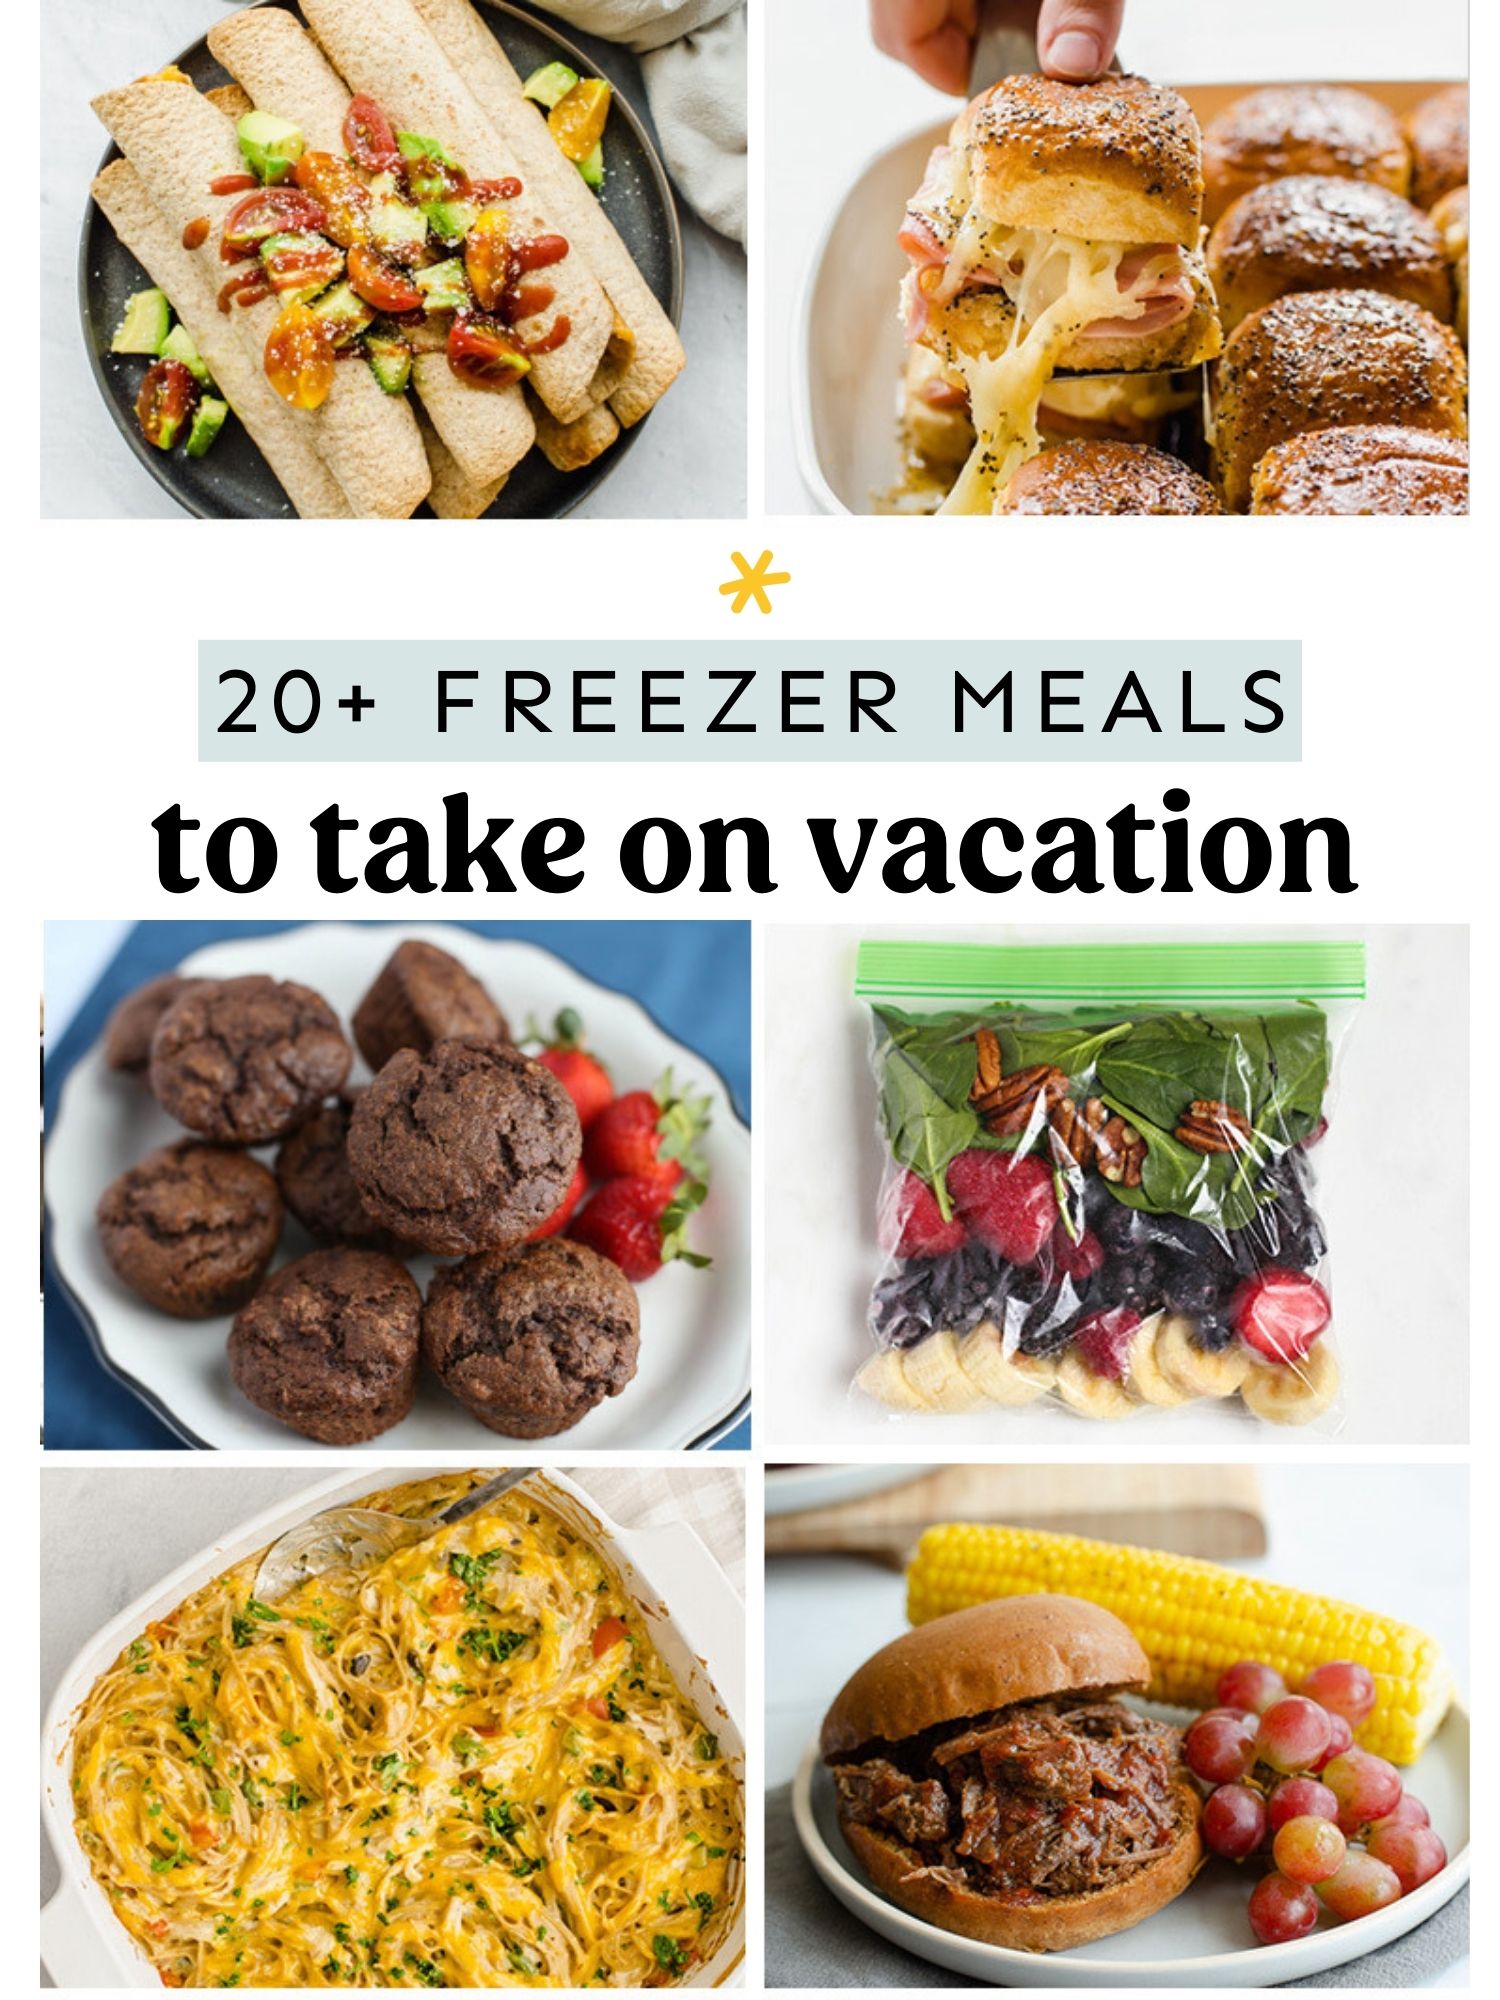 Collage of freezer meals to take on vacation.